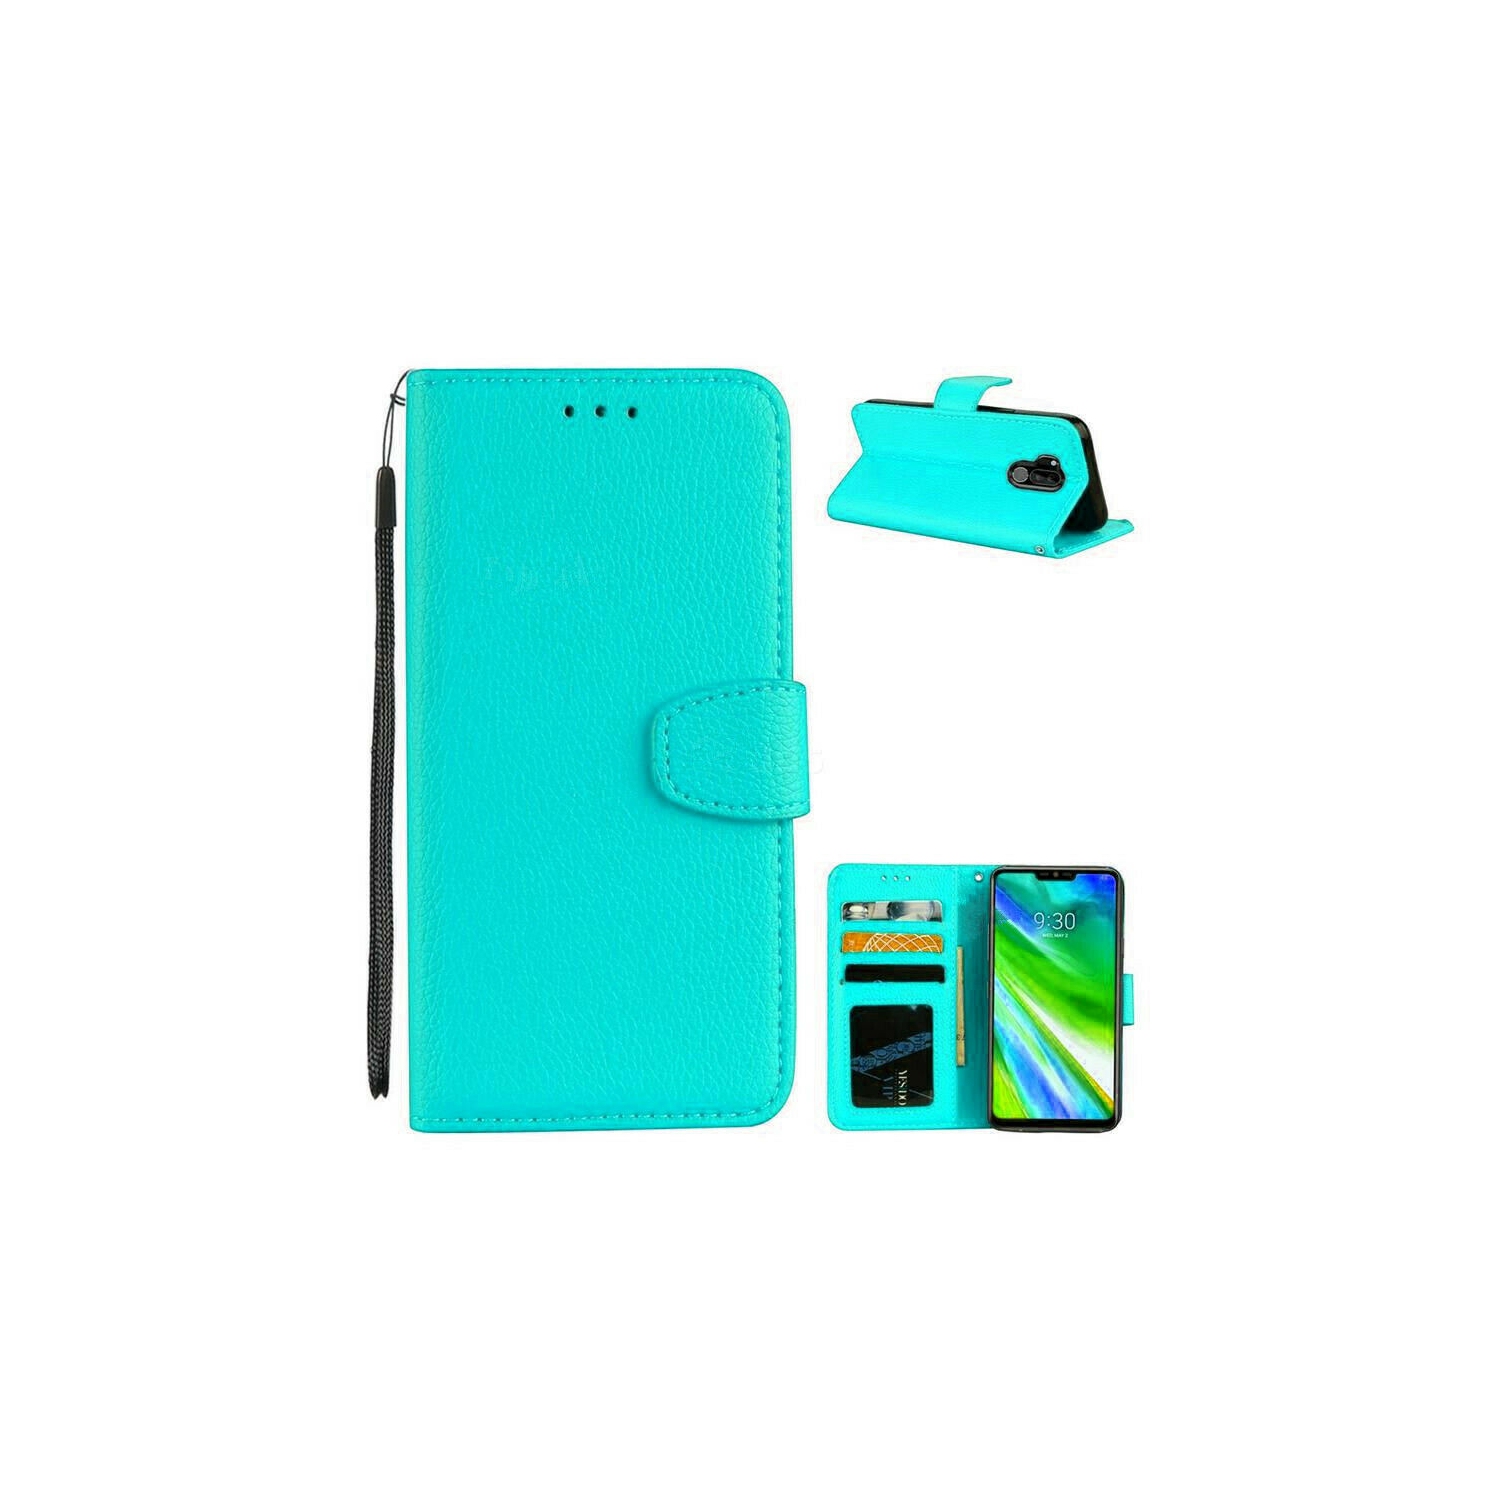 【CSmart】 Magnetic Card Slot Leather Folio Wallet Flip Case Cover for LG G7 ThinQ / G7 One, Mint